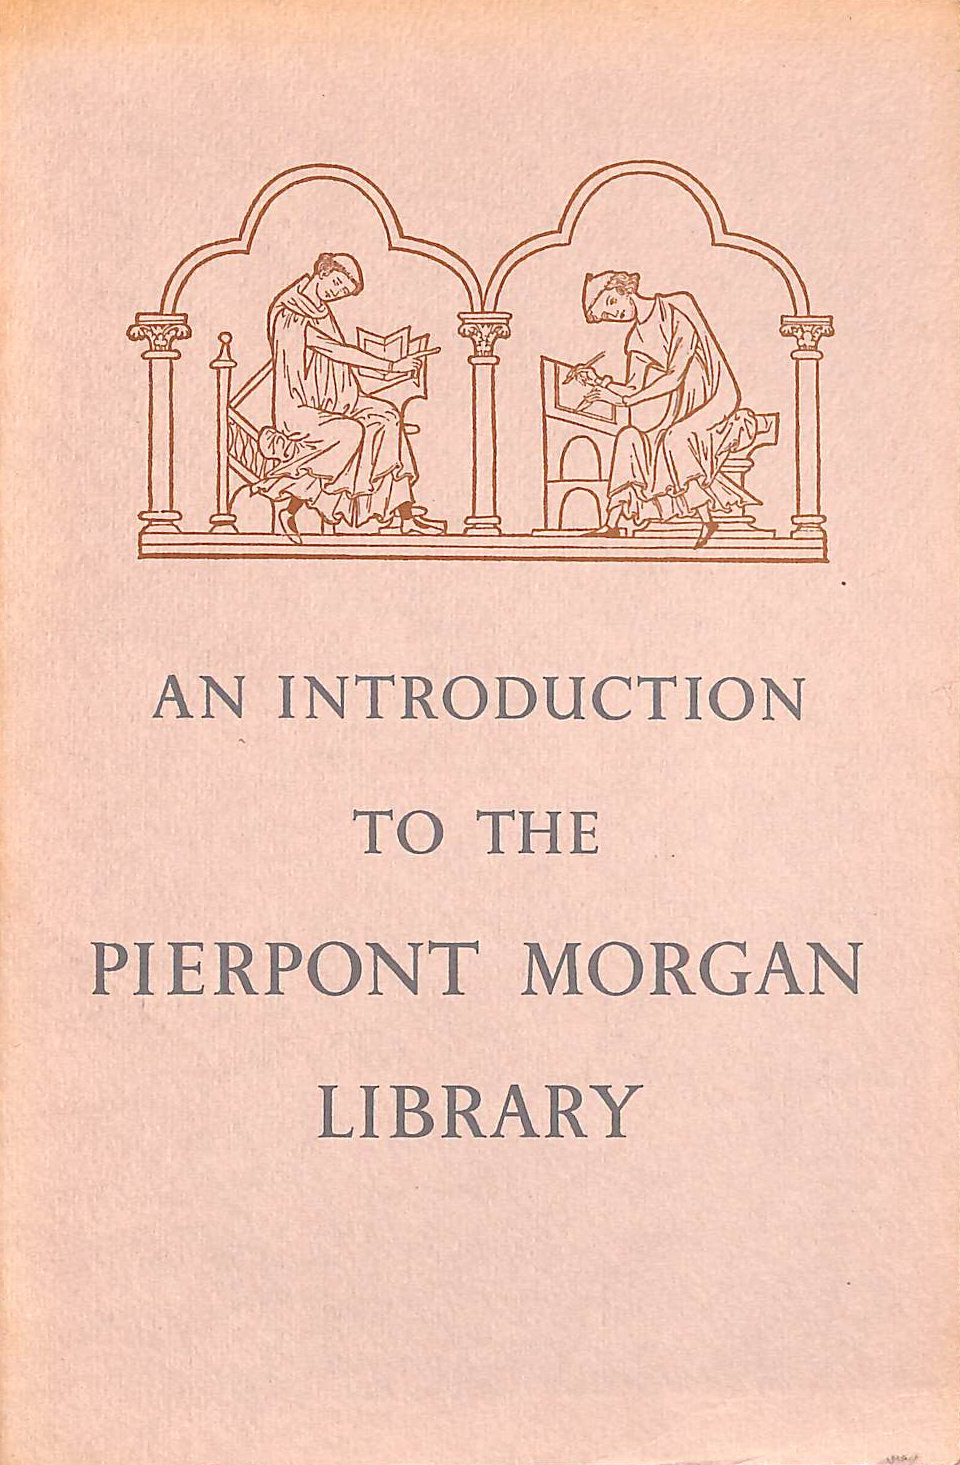 FB ADAMS - An Introduction to the Pierpont Morgan Library